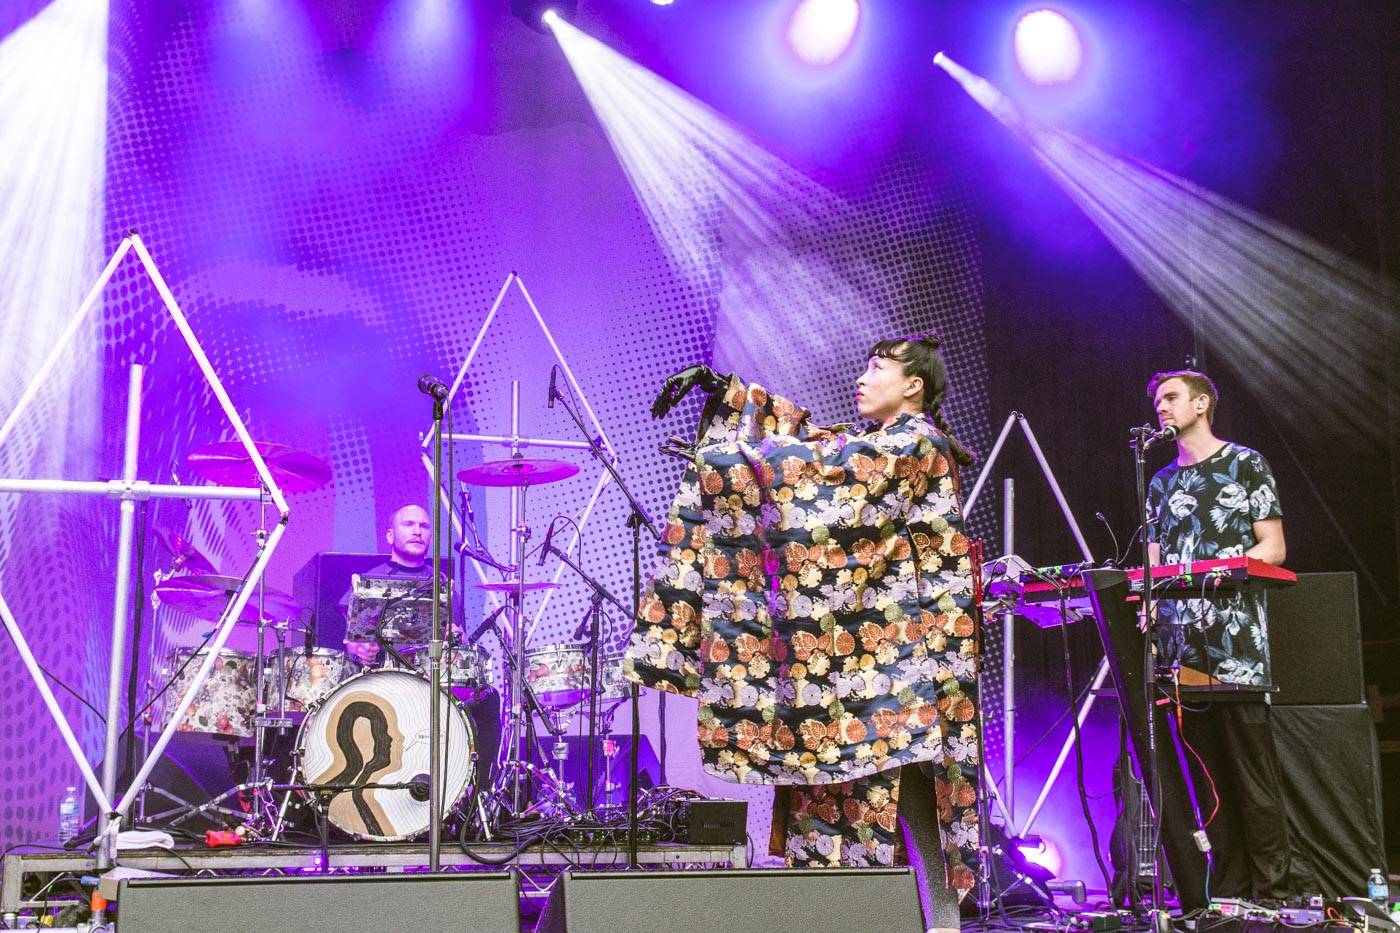 Little Dragon at the Malkin Bowl, Vancouver, May 23 2015. Pavel Boiko photo.